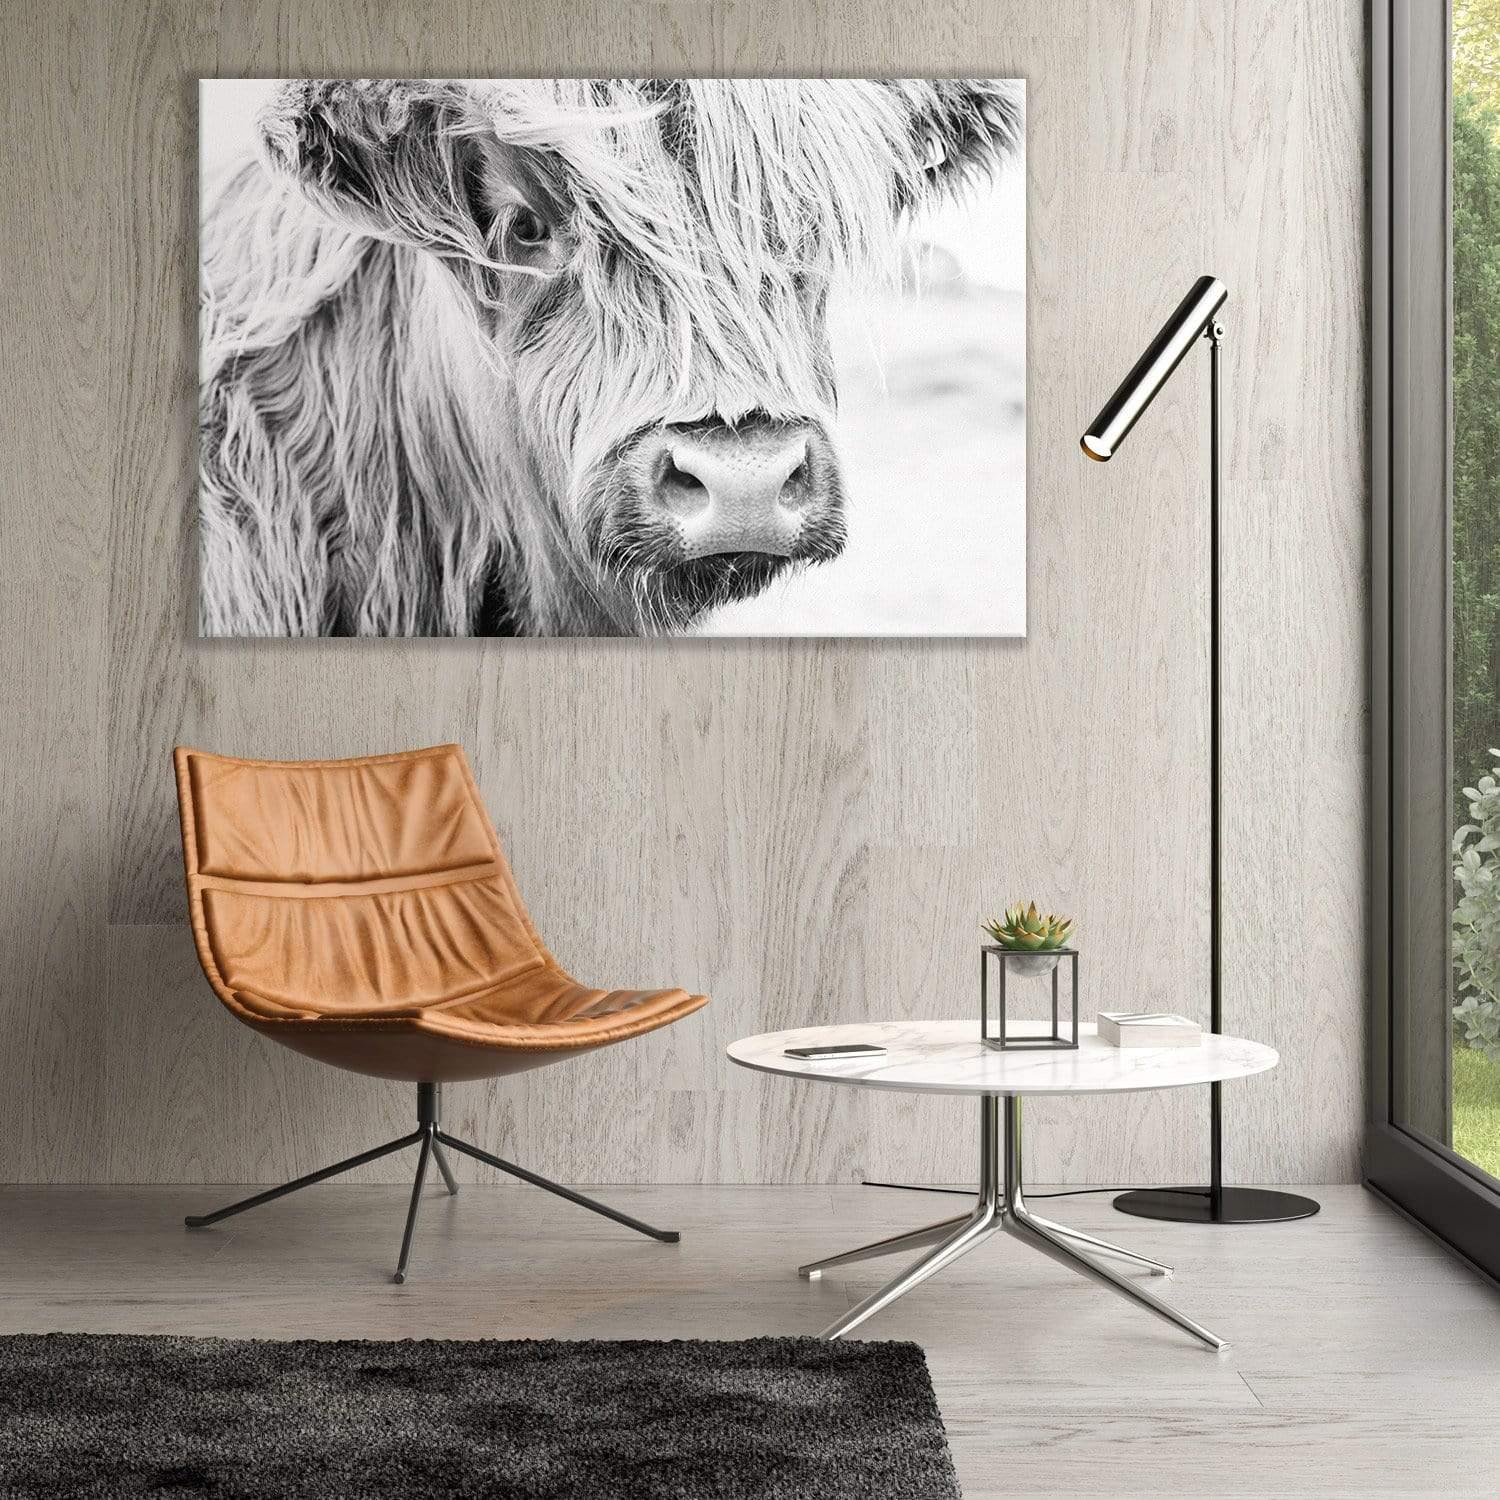 Highland cow black and white